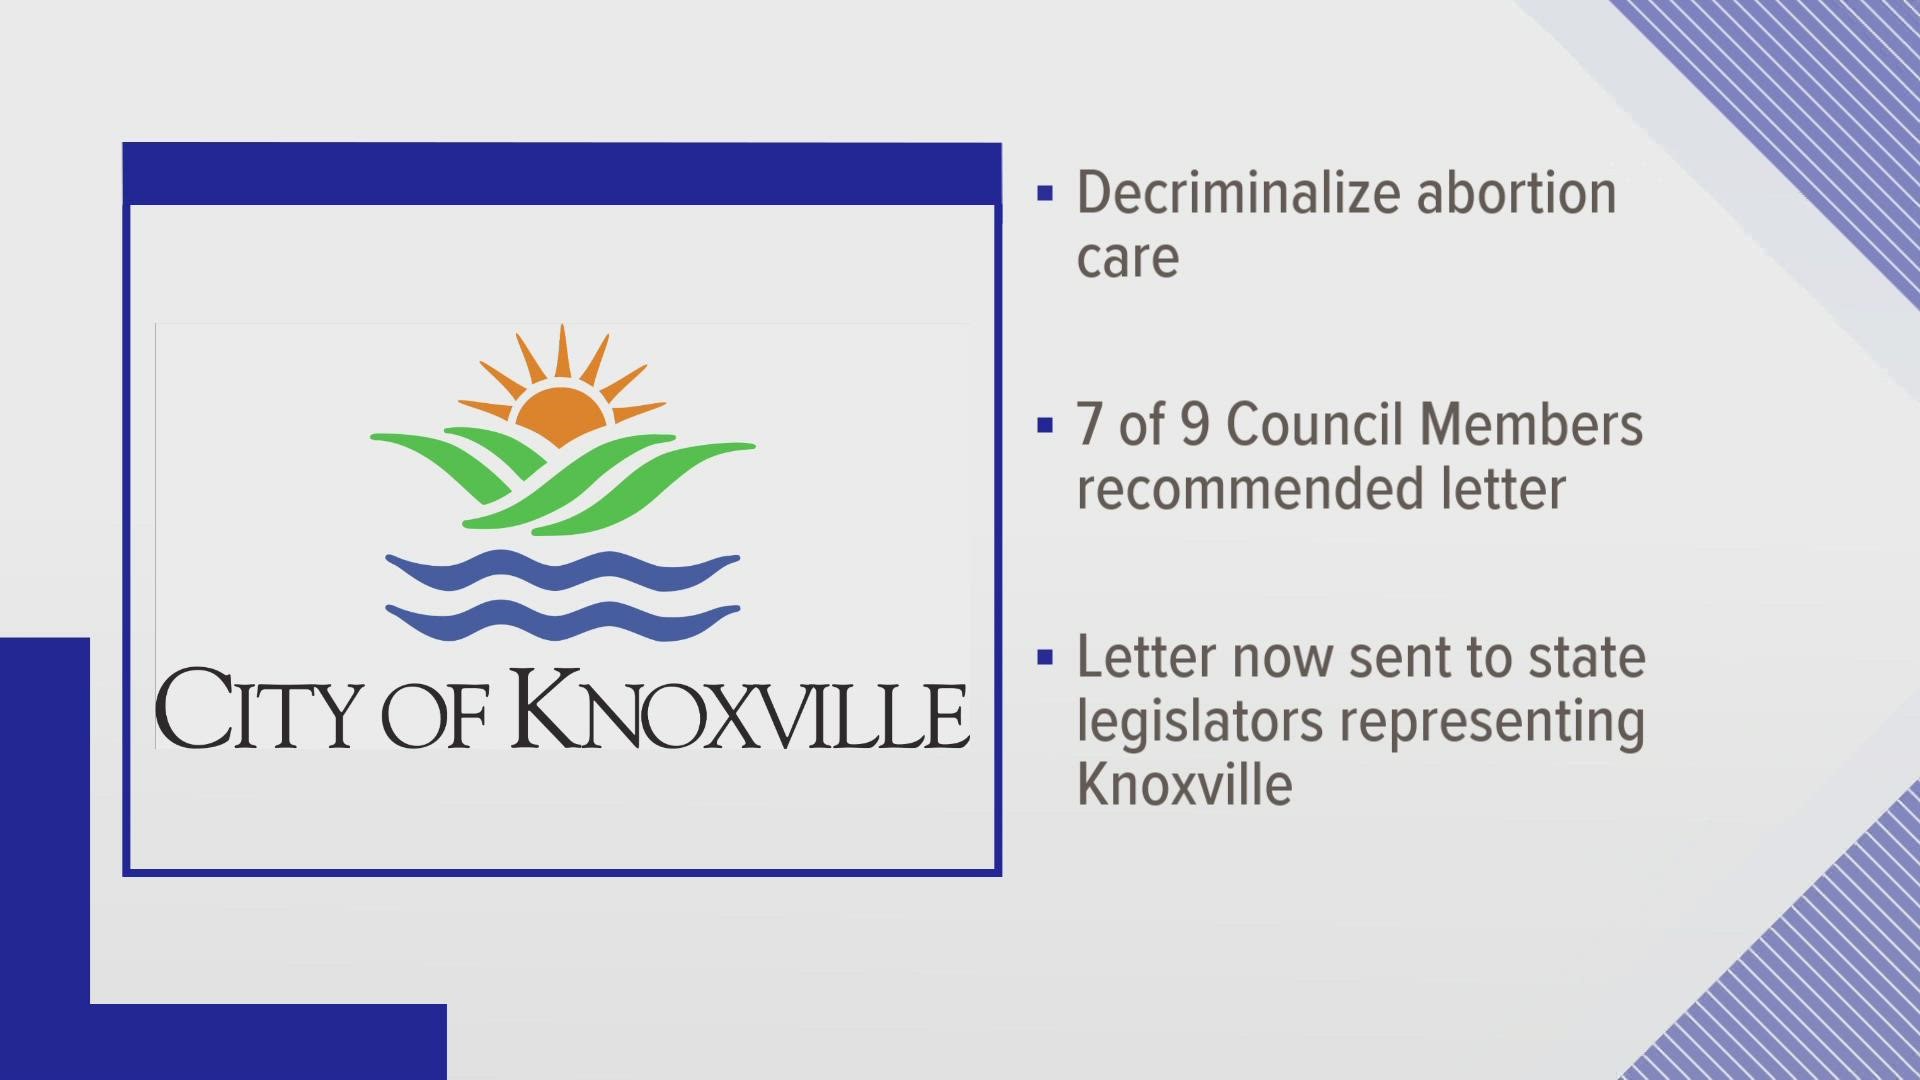 On September 6, Knoxville City Council voted on a resolution calling for state lawmakers to decriminalize abortion care.